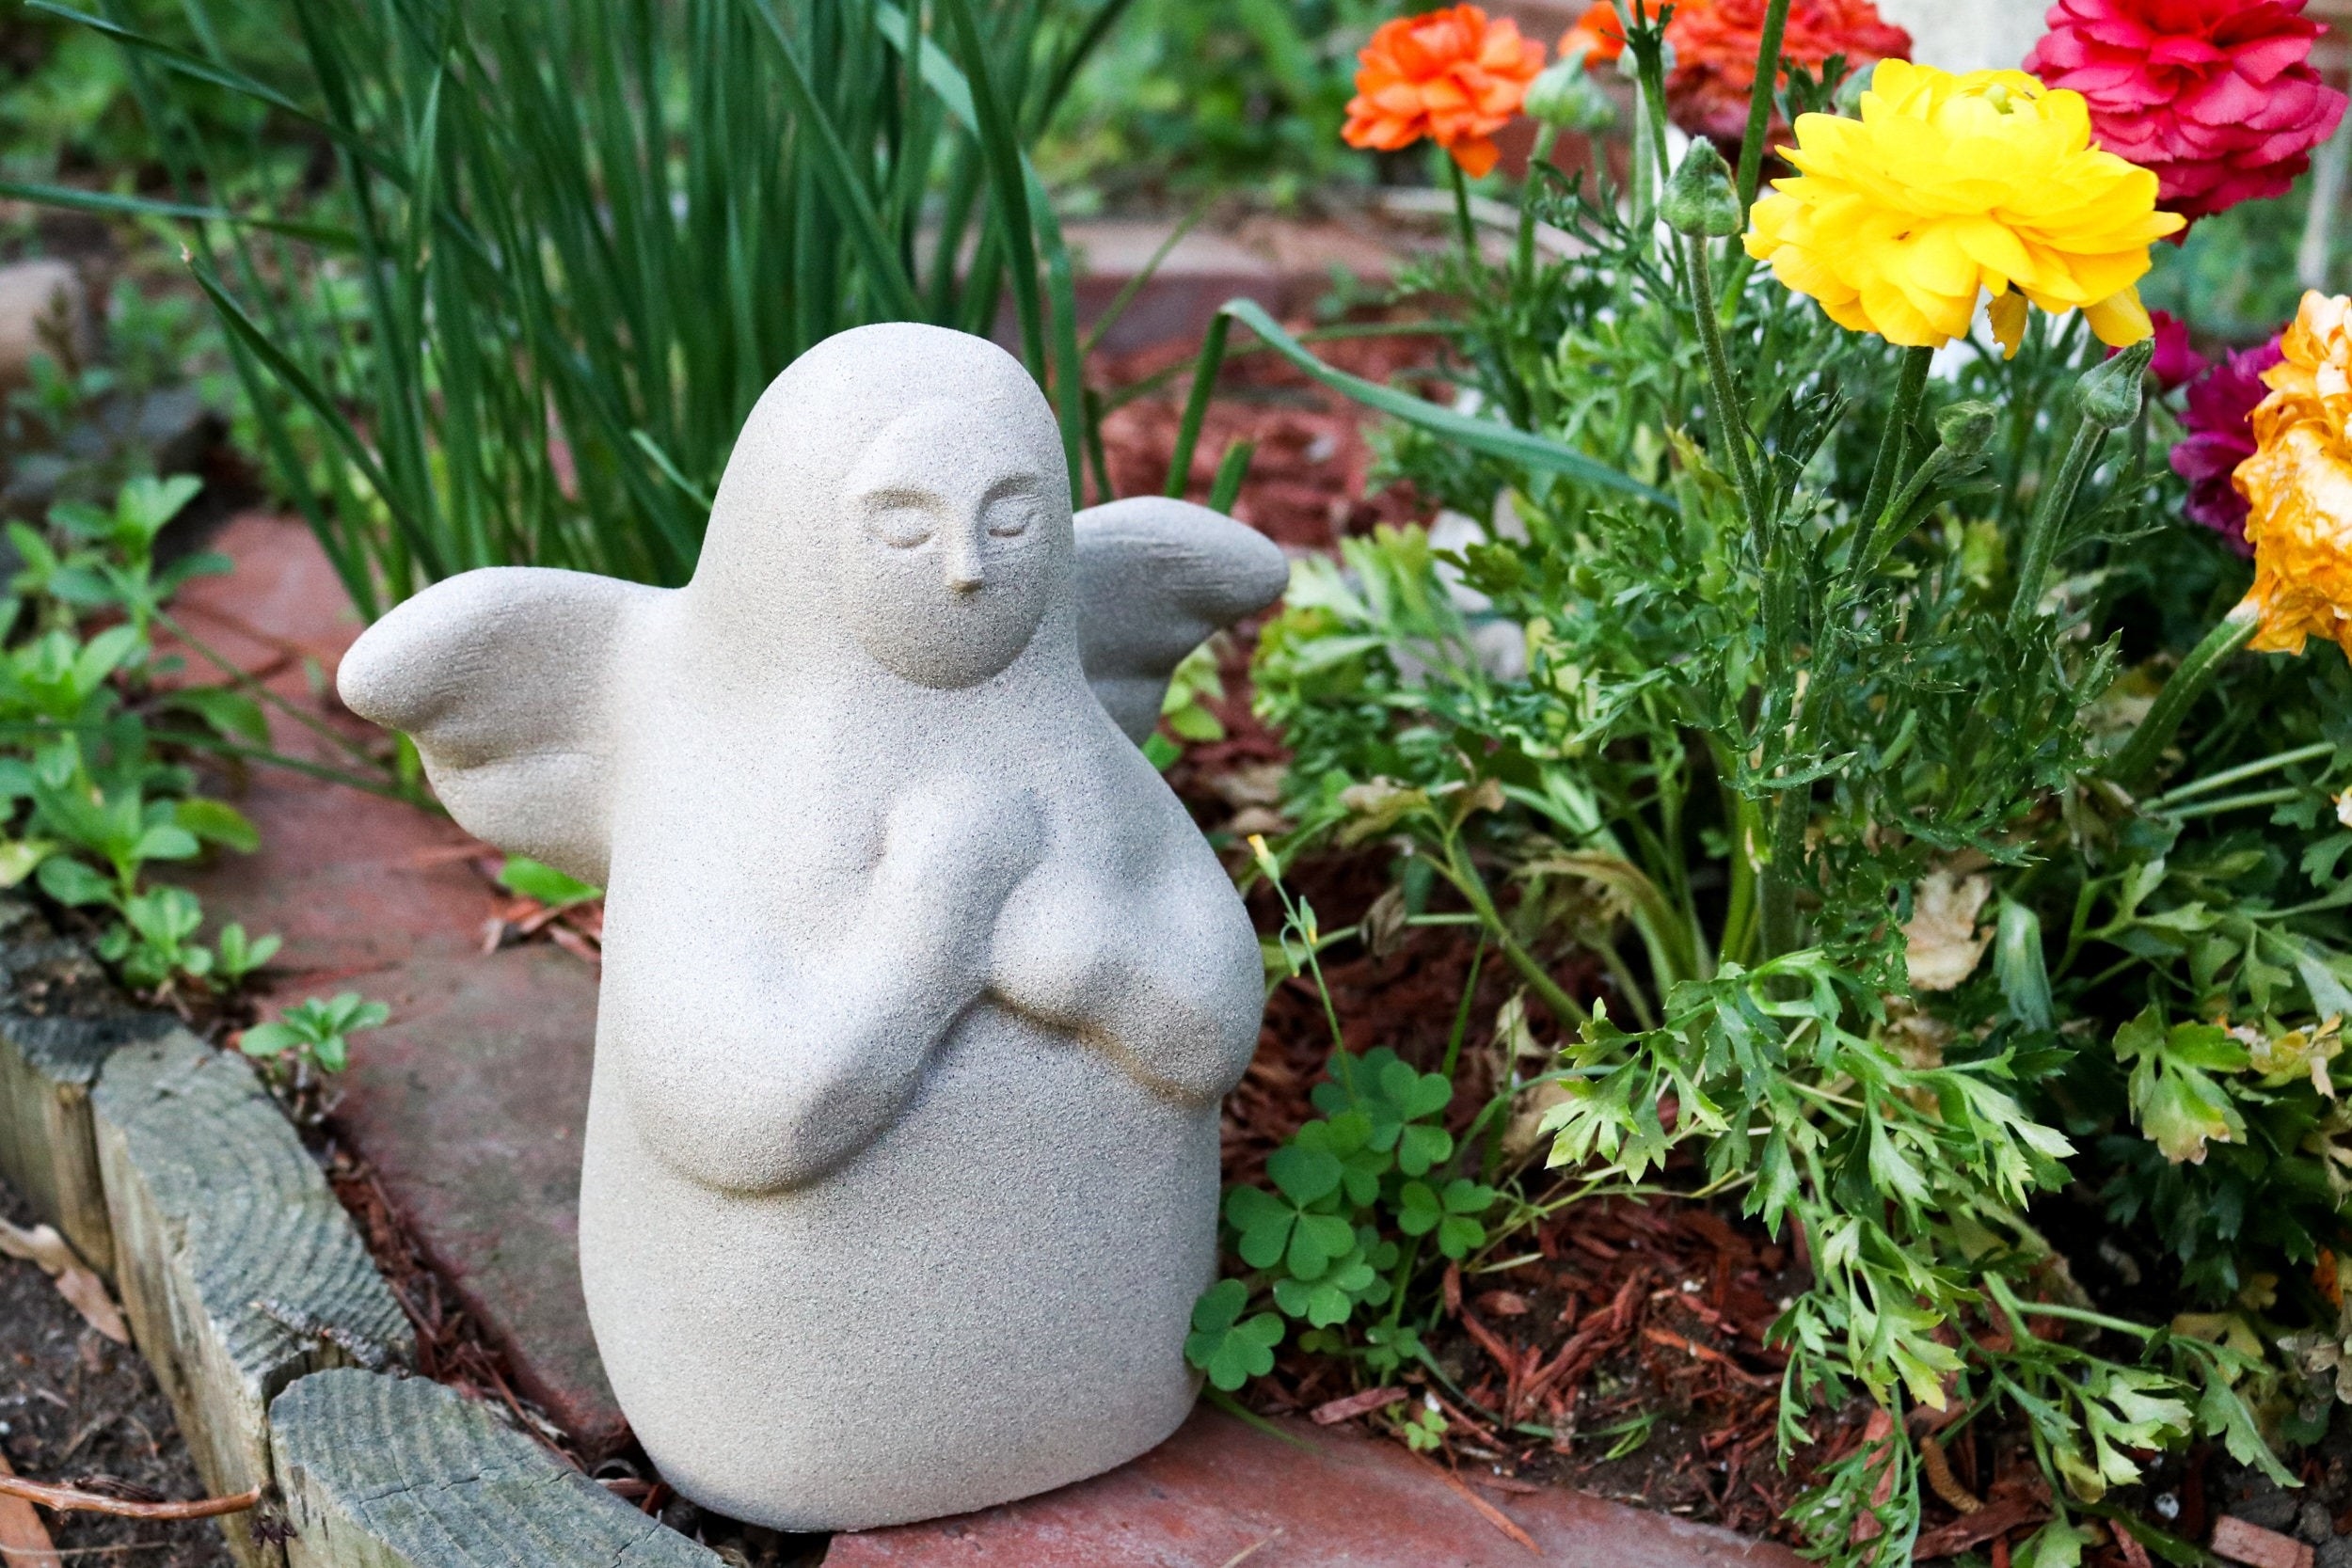 statue shaped like praying angel from video game 